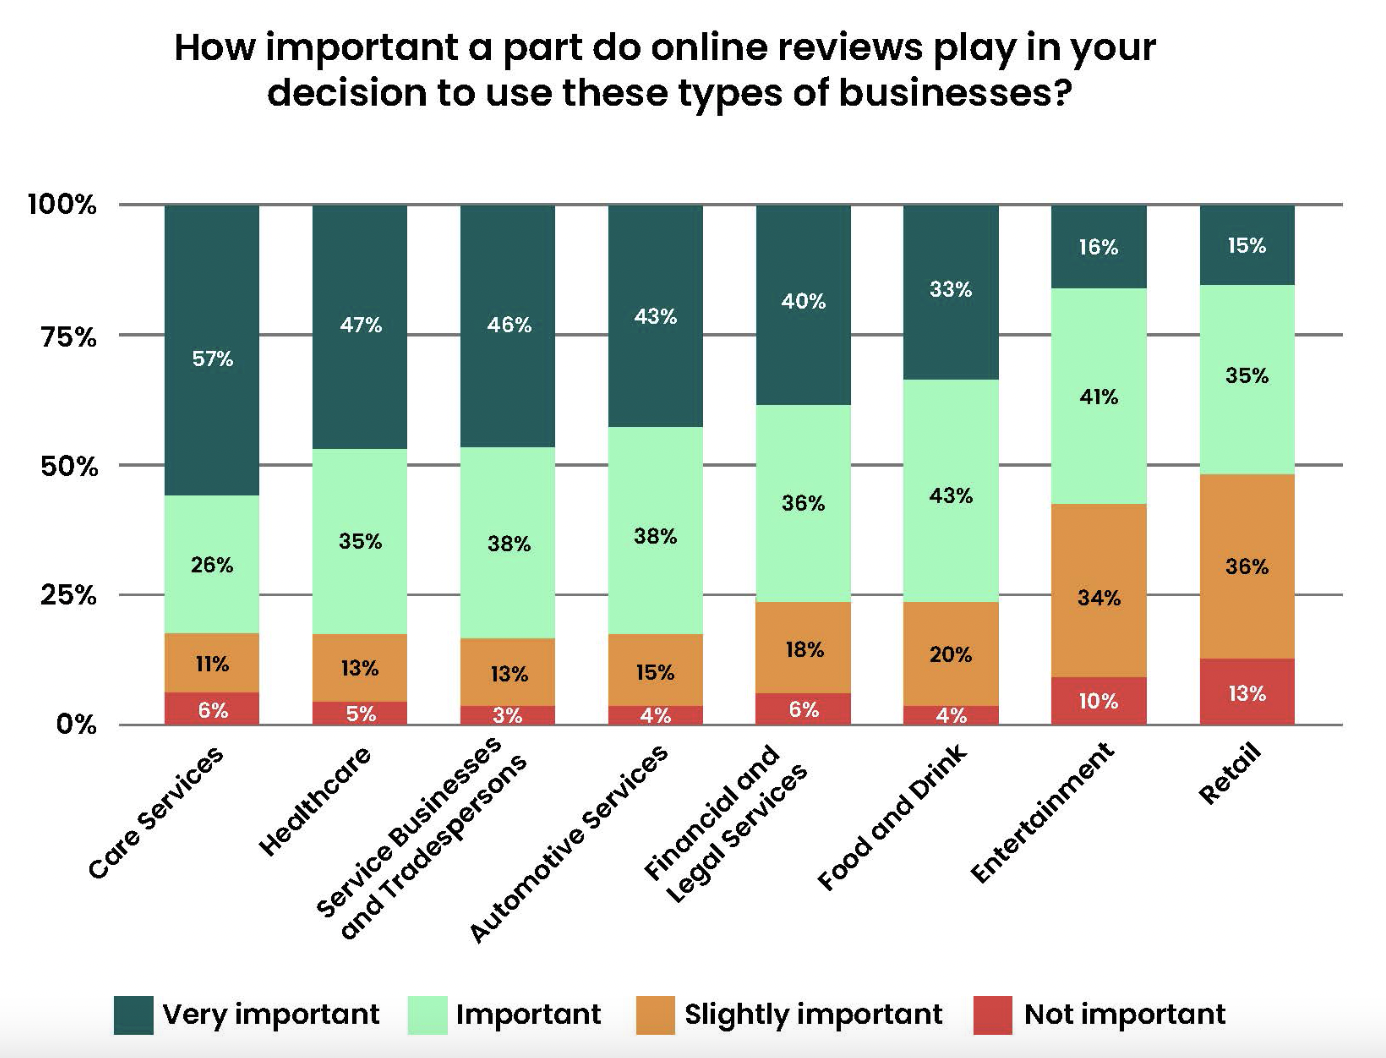 The graph shows the importance of customer reviews in consumer purchasing decisions.
